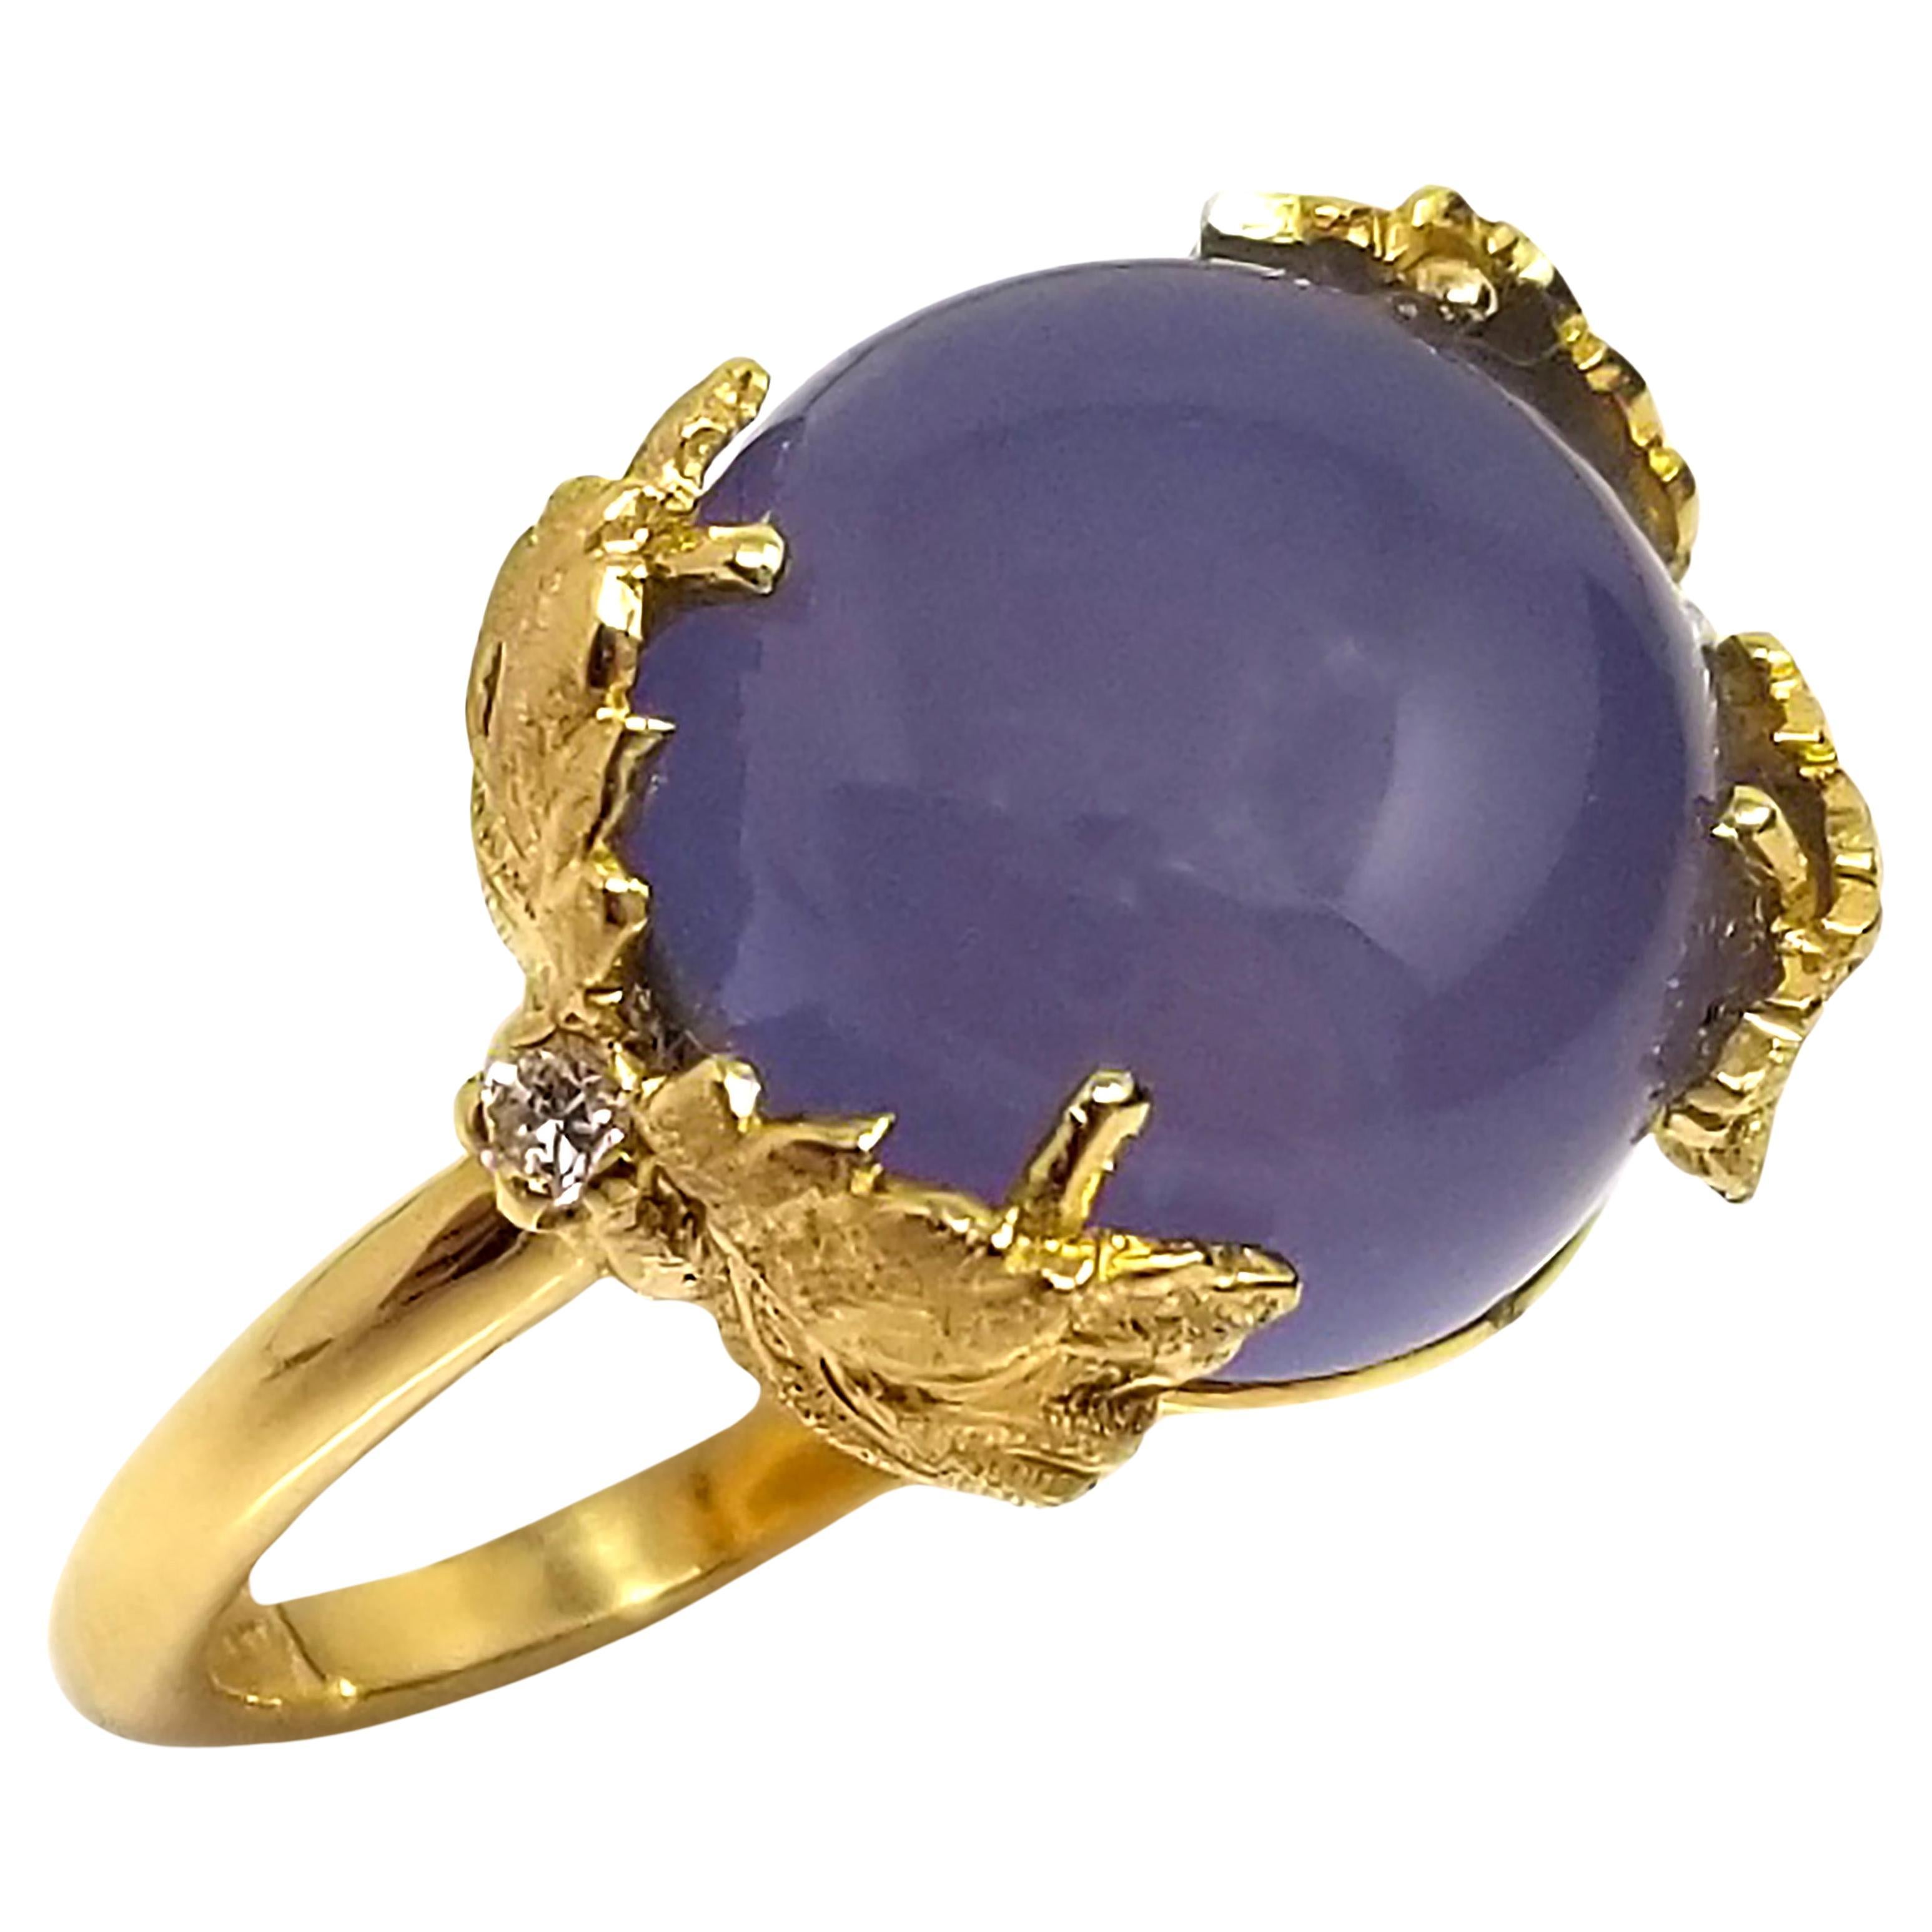 6.28ct Namibian Chalcedony and 18kt Ring, Made in Florence, Italy